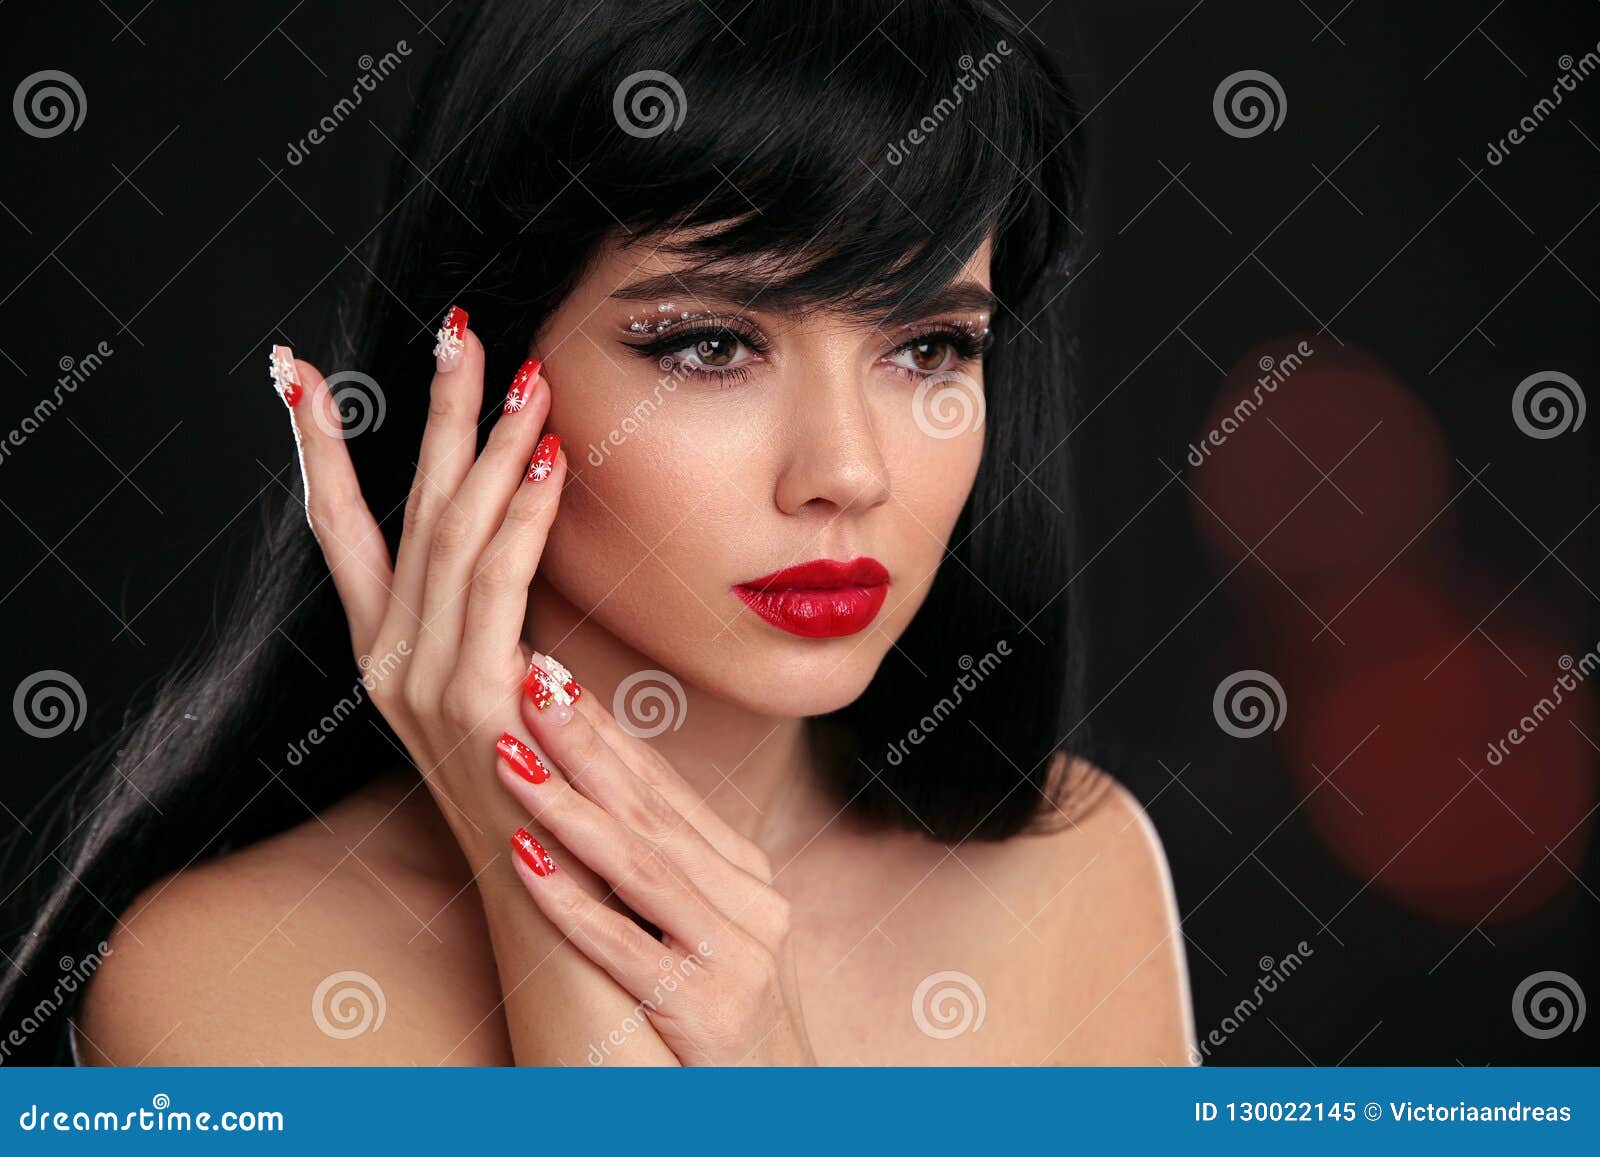 Christmas Red Lips Makeup And Manicured Nails Beautiful Brunette Girl Closeup Portrait Stock 